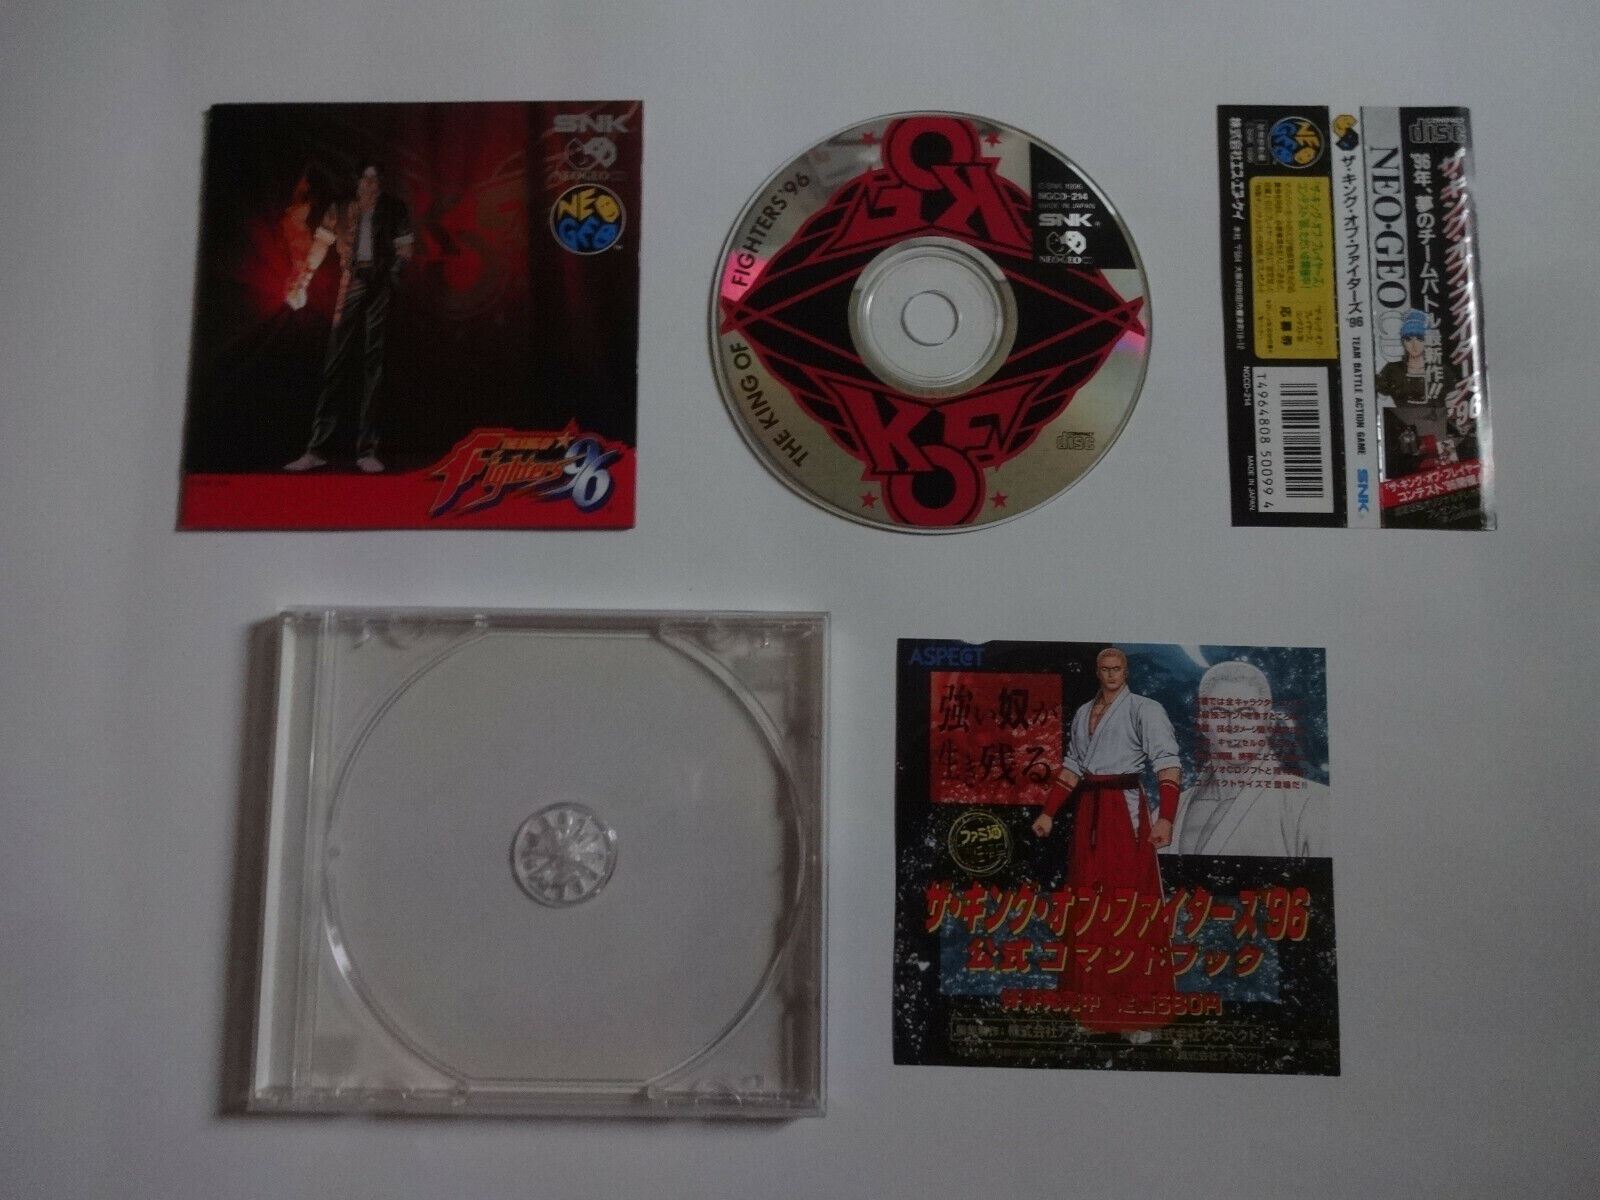 NEO GEO CD "The King of Fighters 96" SNK NGC 1996 w/Obi NTSC-J From Japan #00146